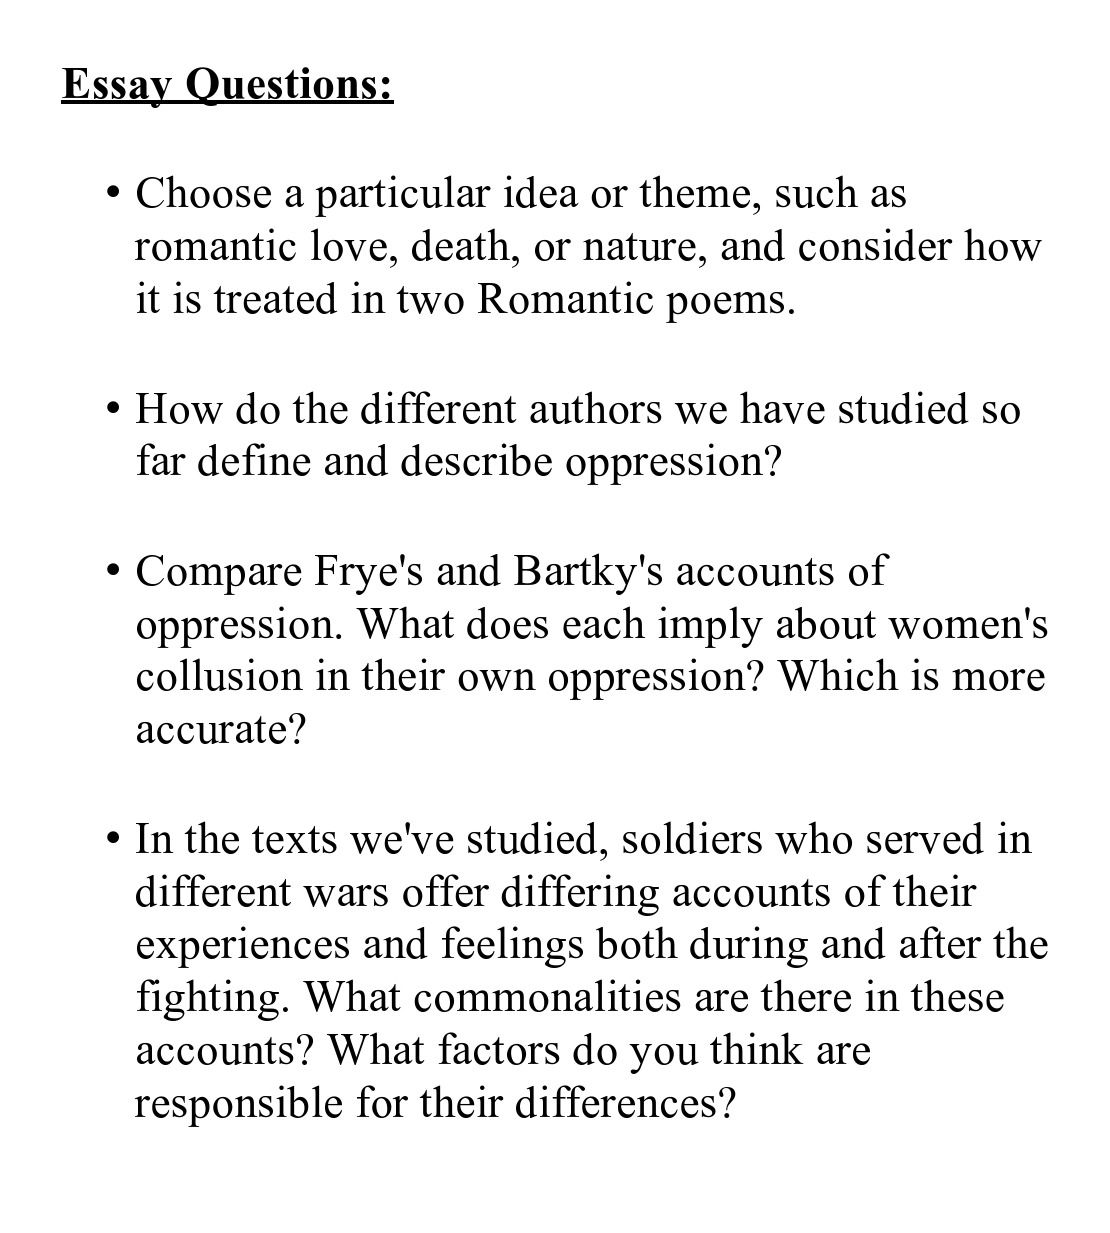 essay questions may also be referred to as